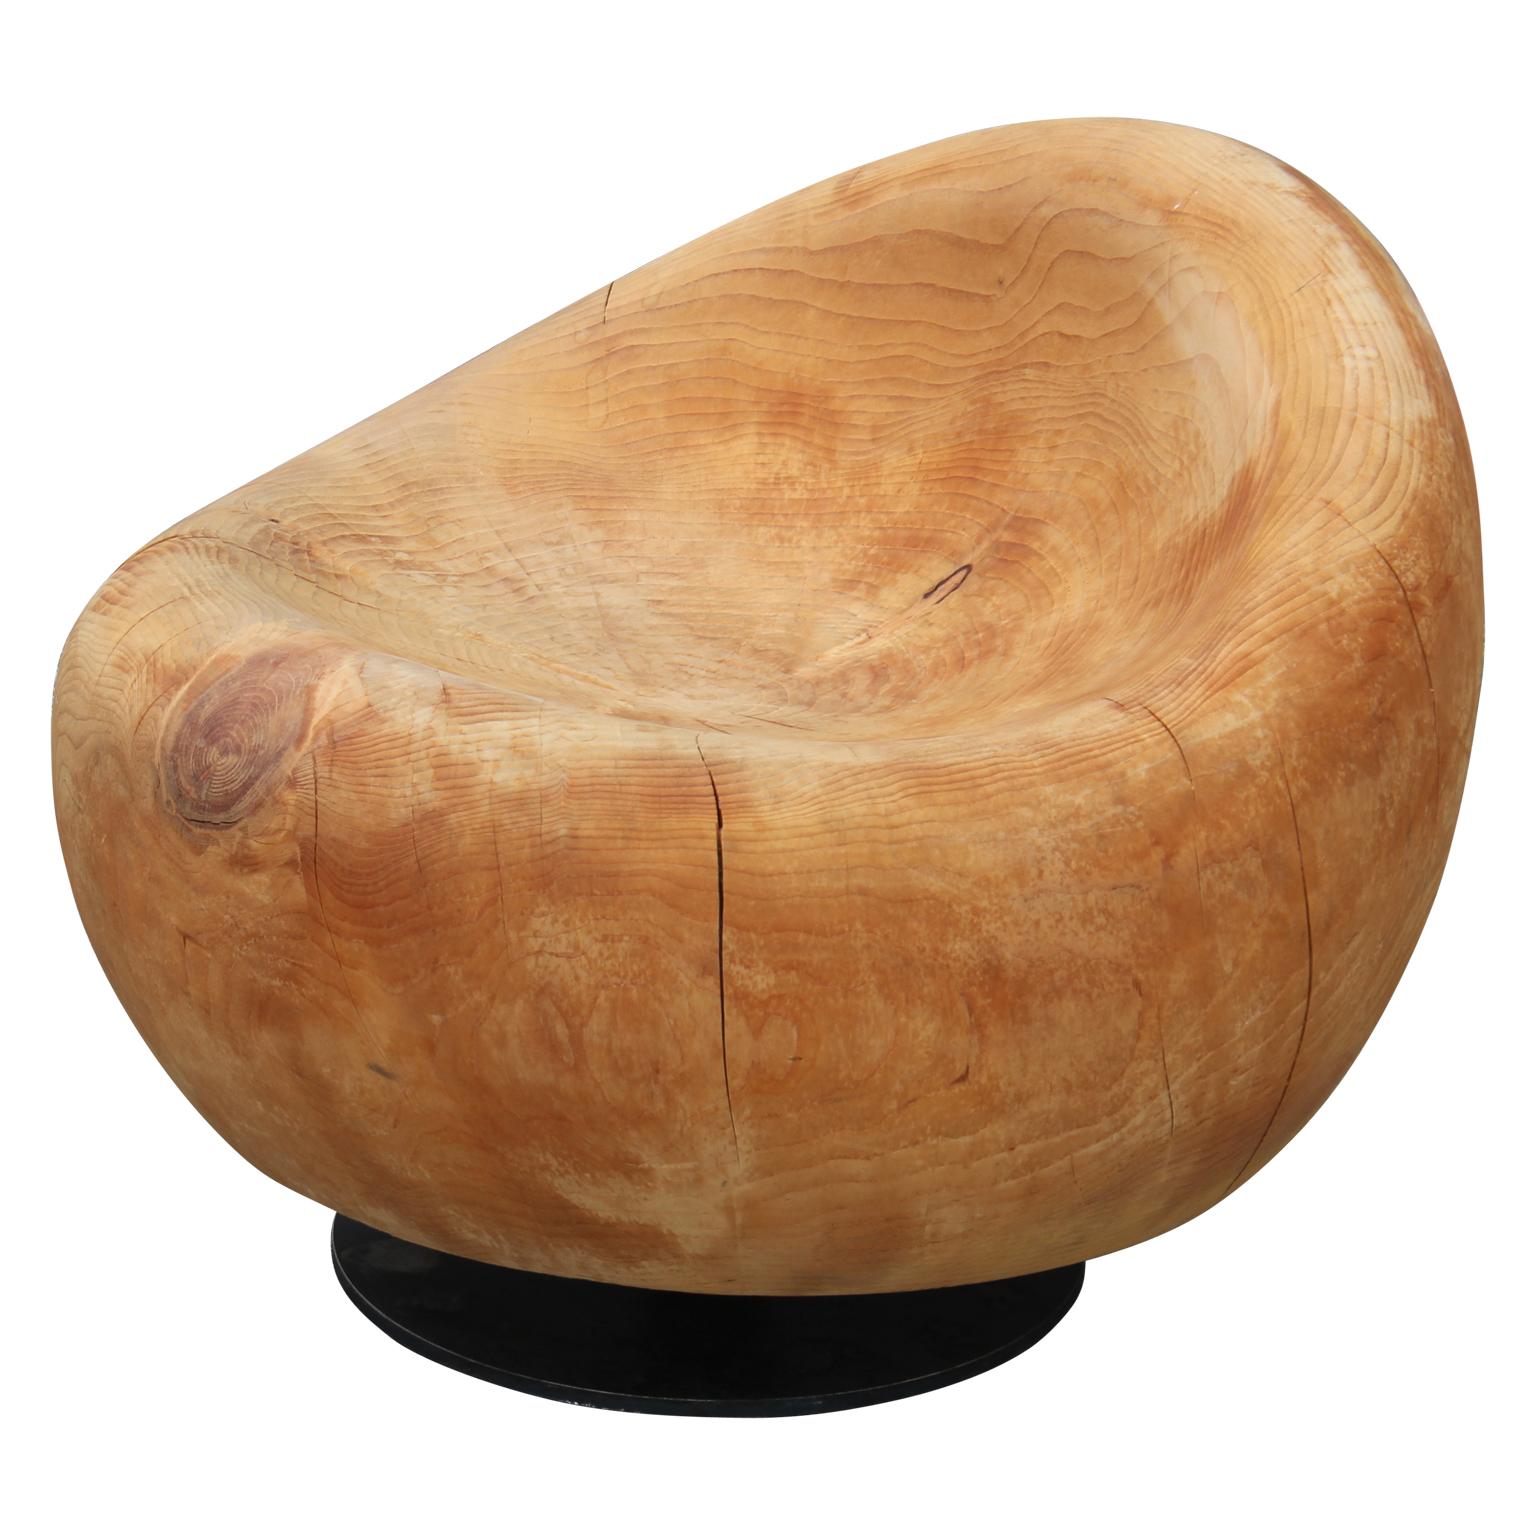 Modern unique custom egg shaped swivel lounge chair or slipper chair. Carved out of one solid piece of pine wood with a steel base.